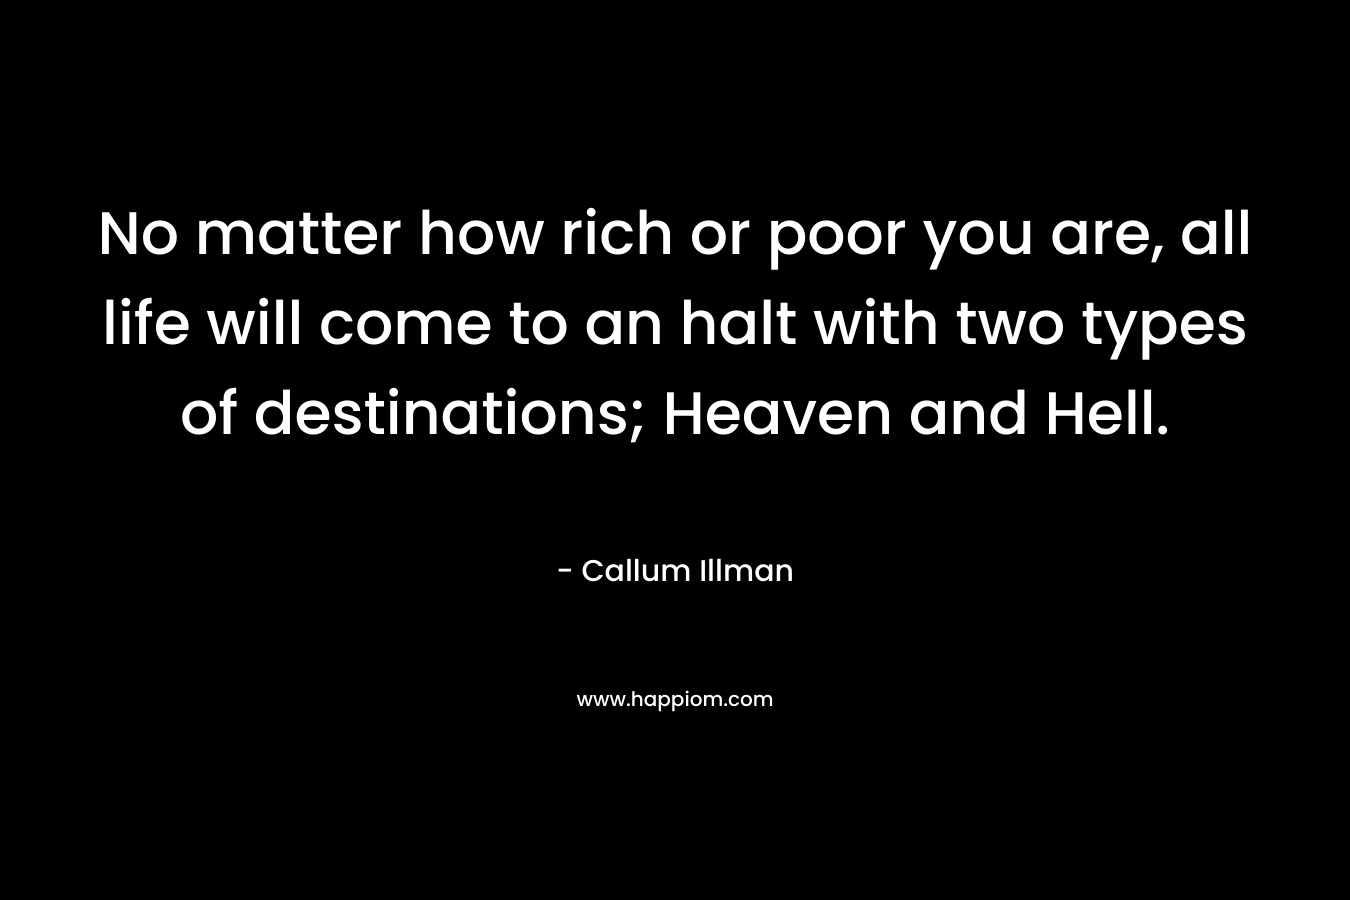 No matter how rich or poor you are, all life will come to an halt with two types of destinations; Heaven and Hell. – Callum Illman